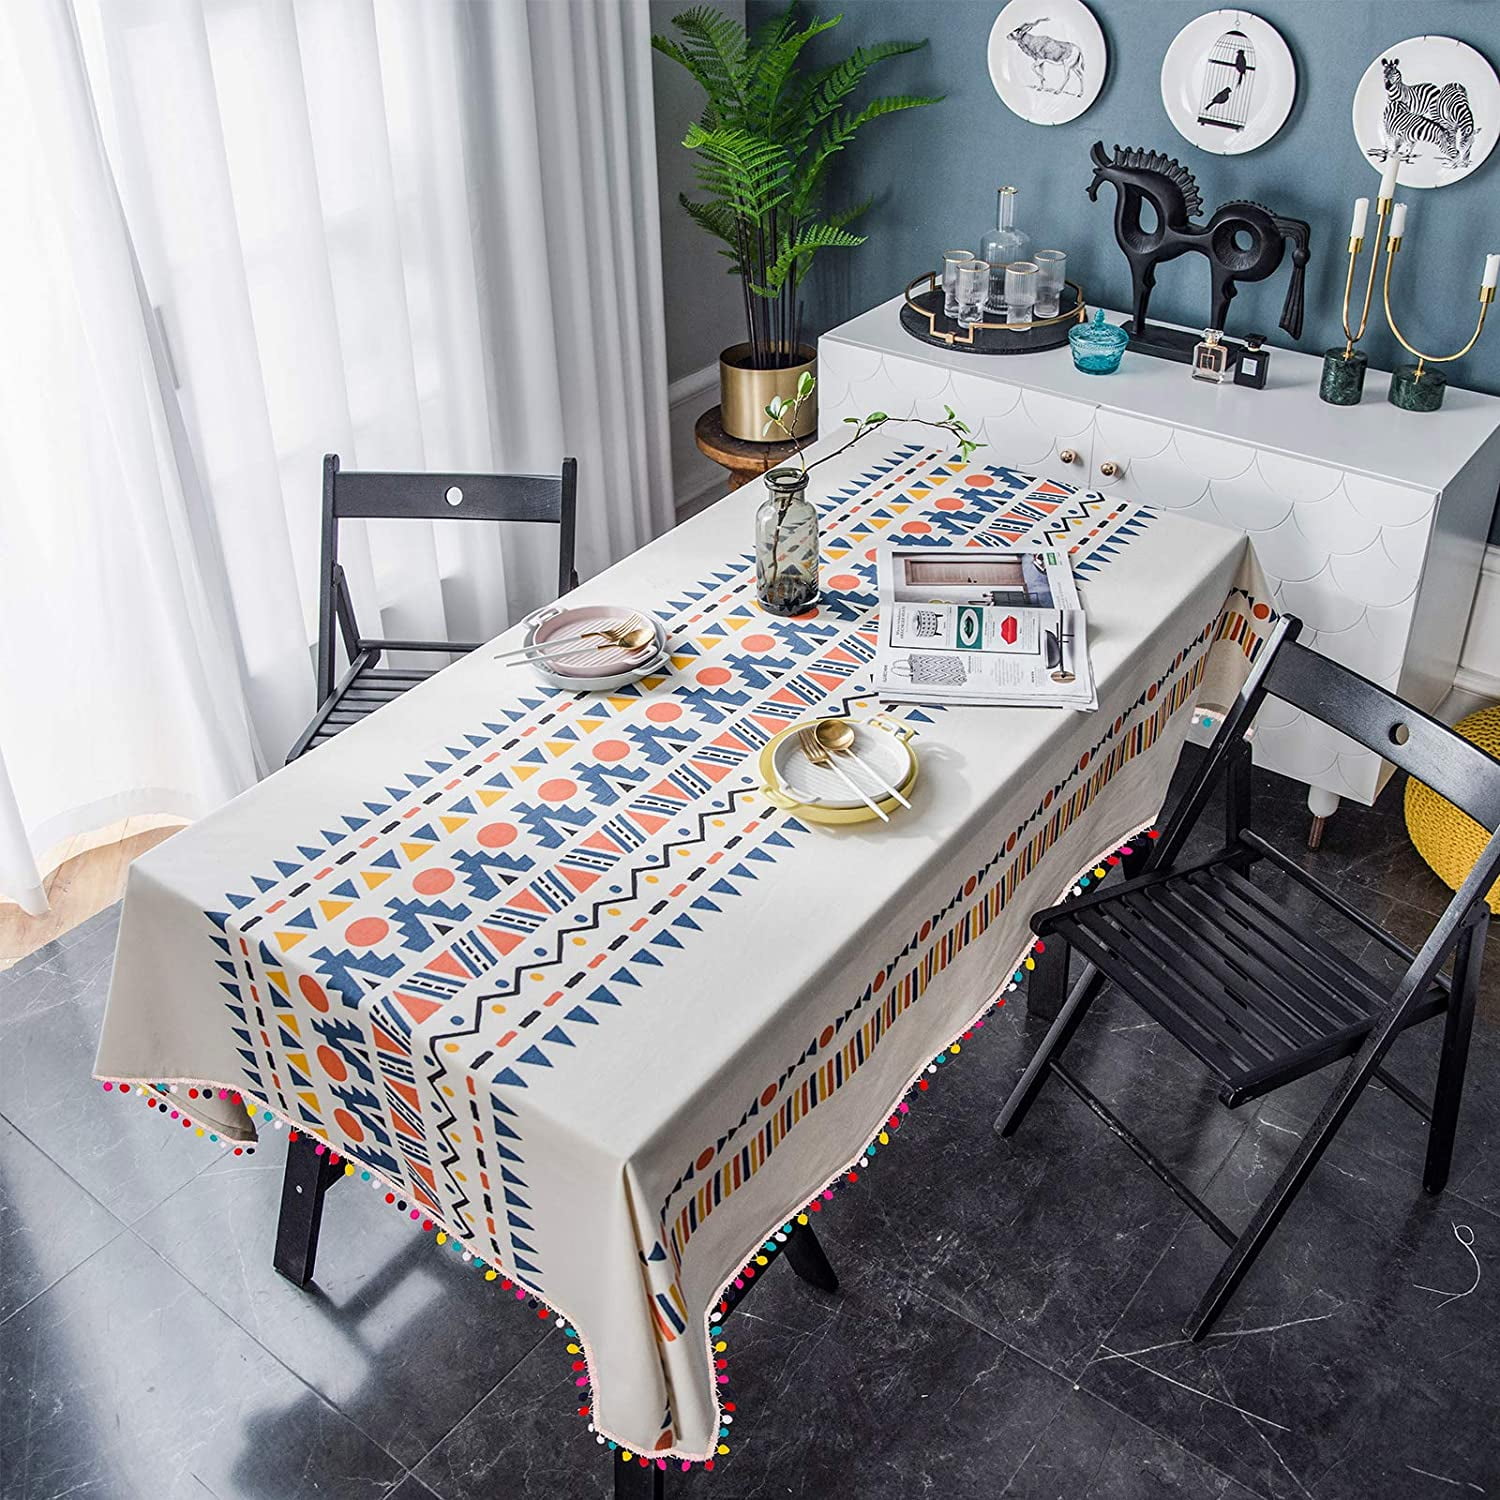 HQ Fabric Linen Look Table Cloth Table Cover Rectangle Square Tablecloth Dining 